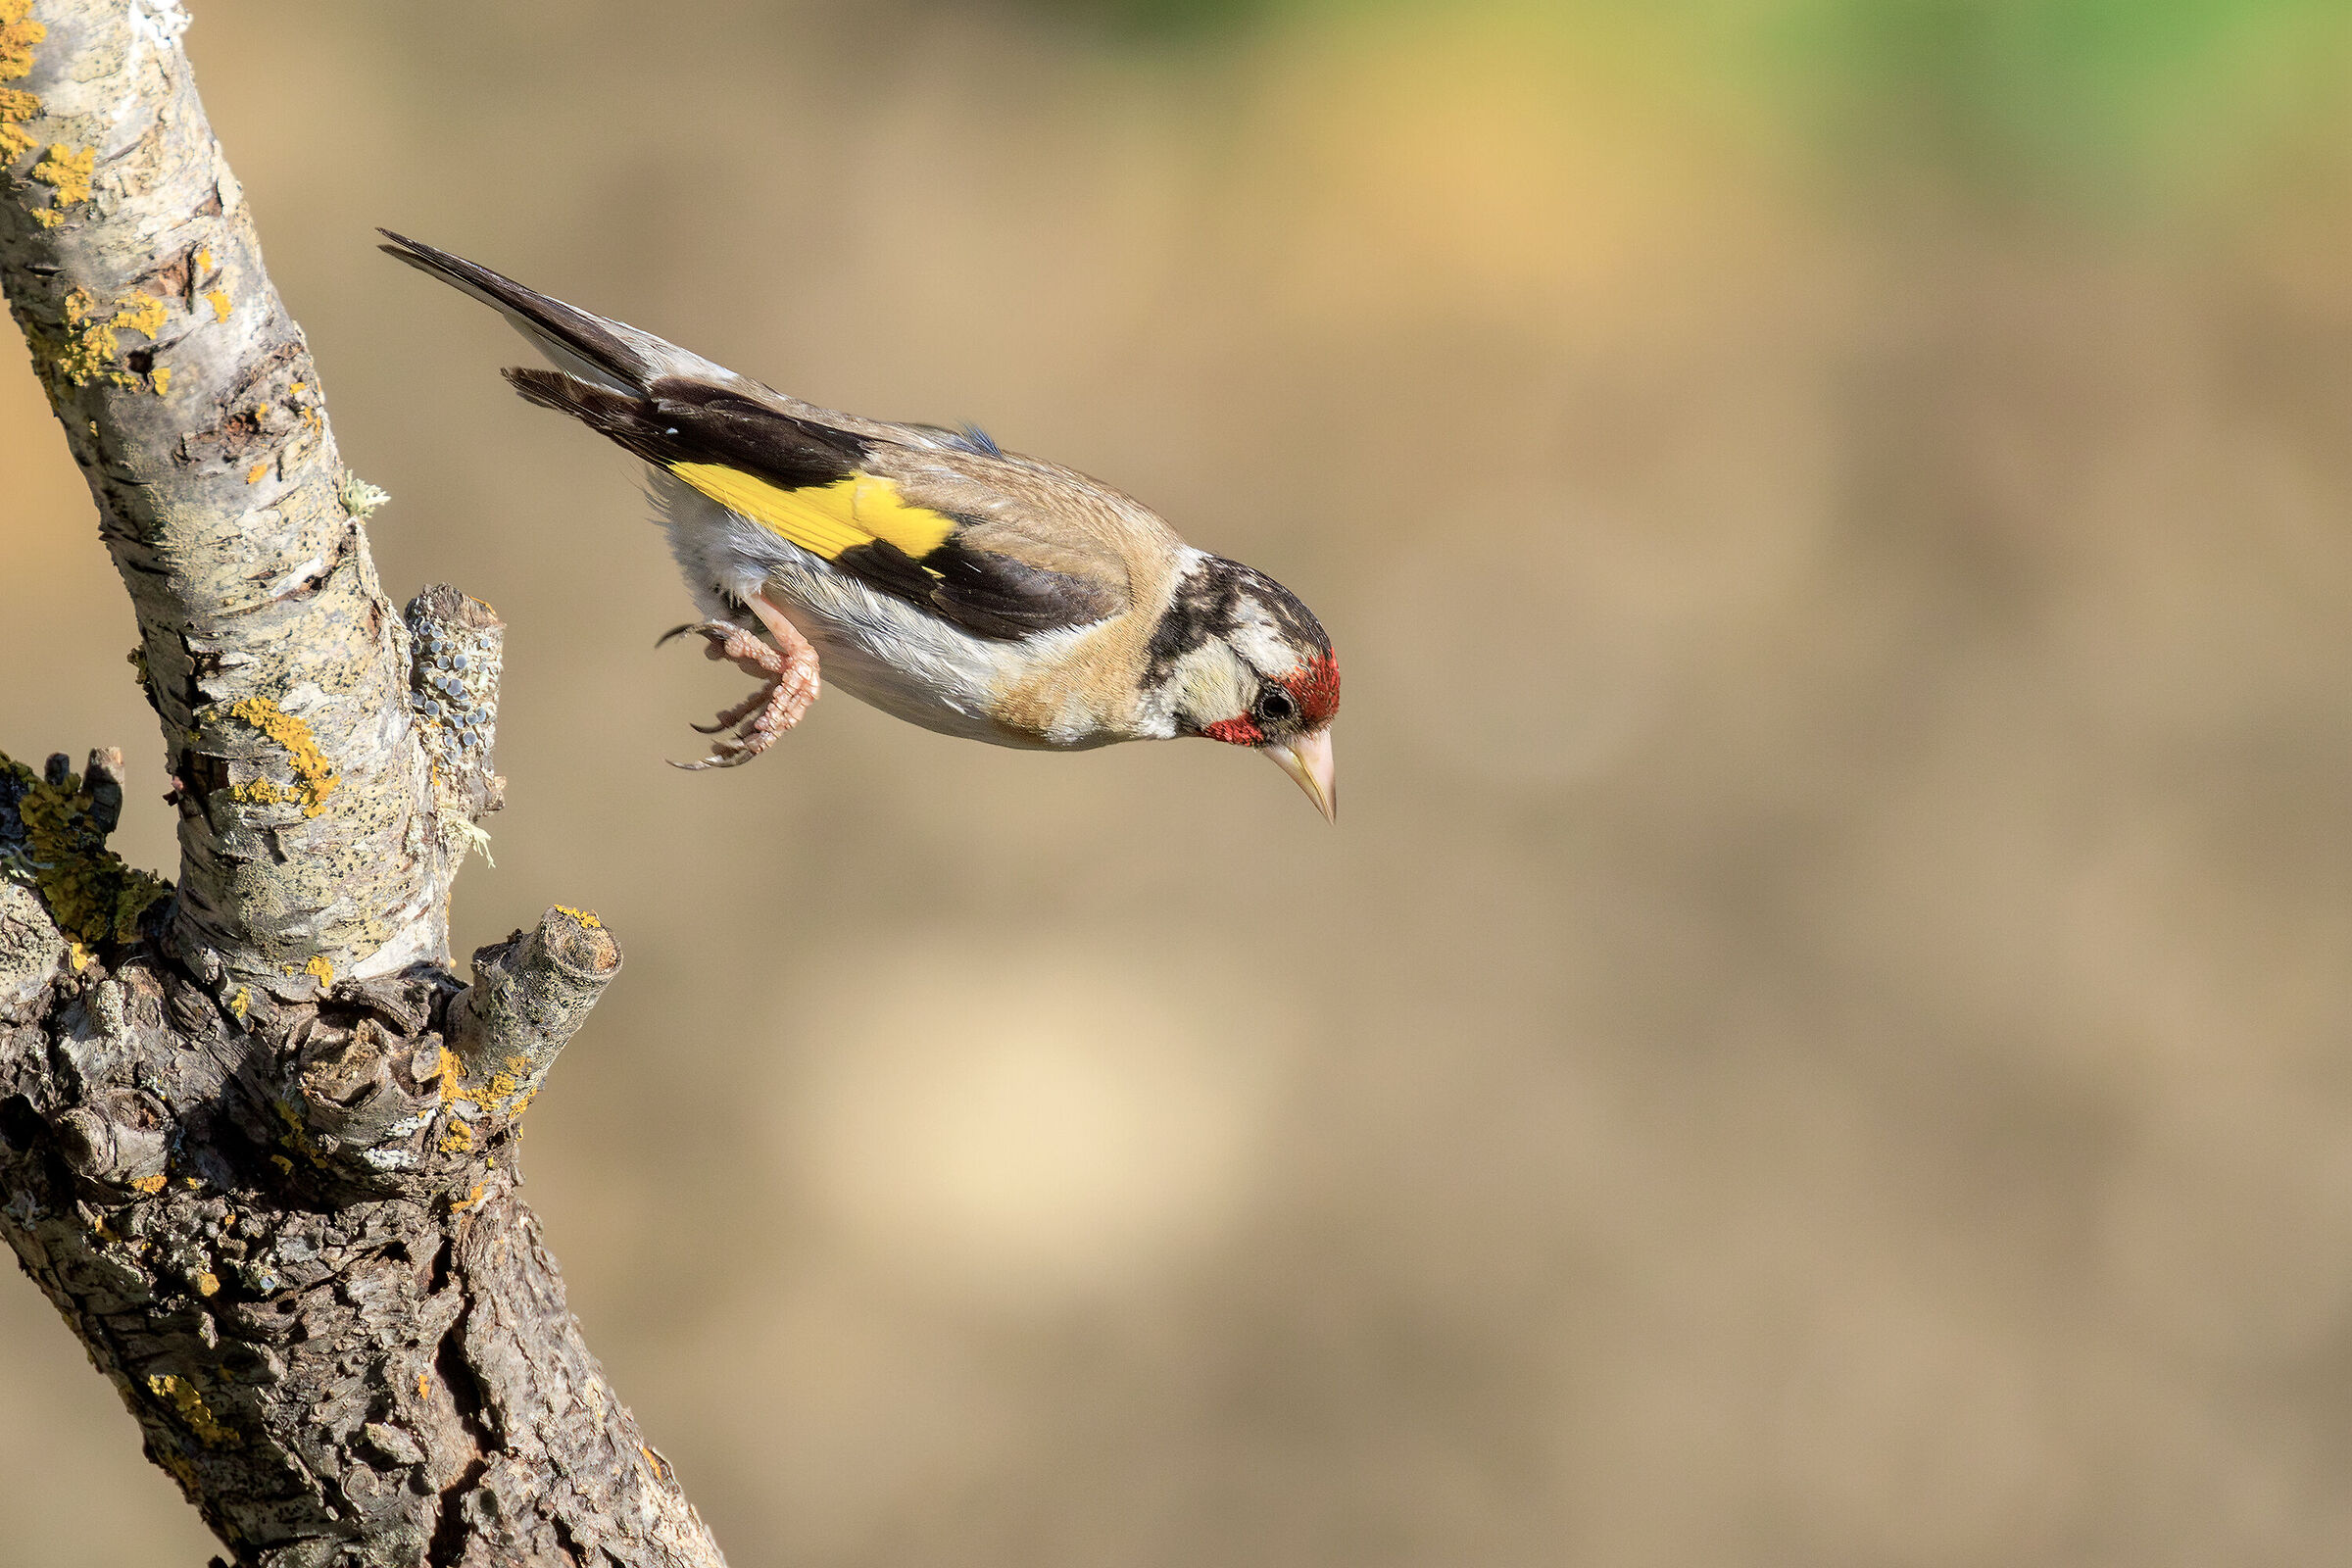 The goldfinch's dive....